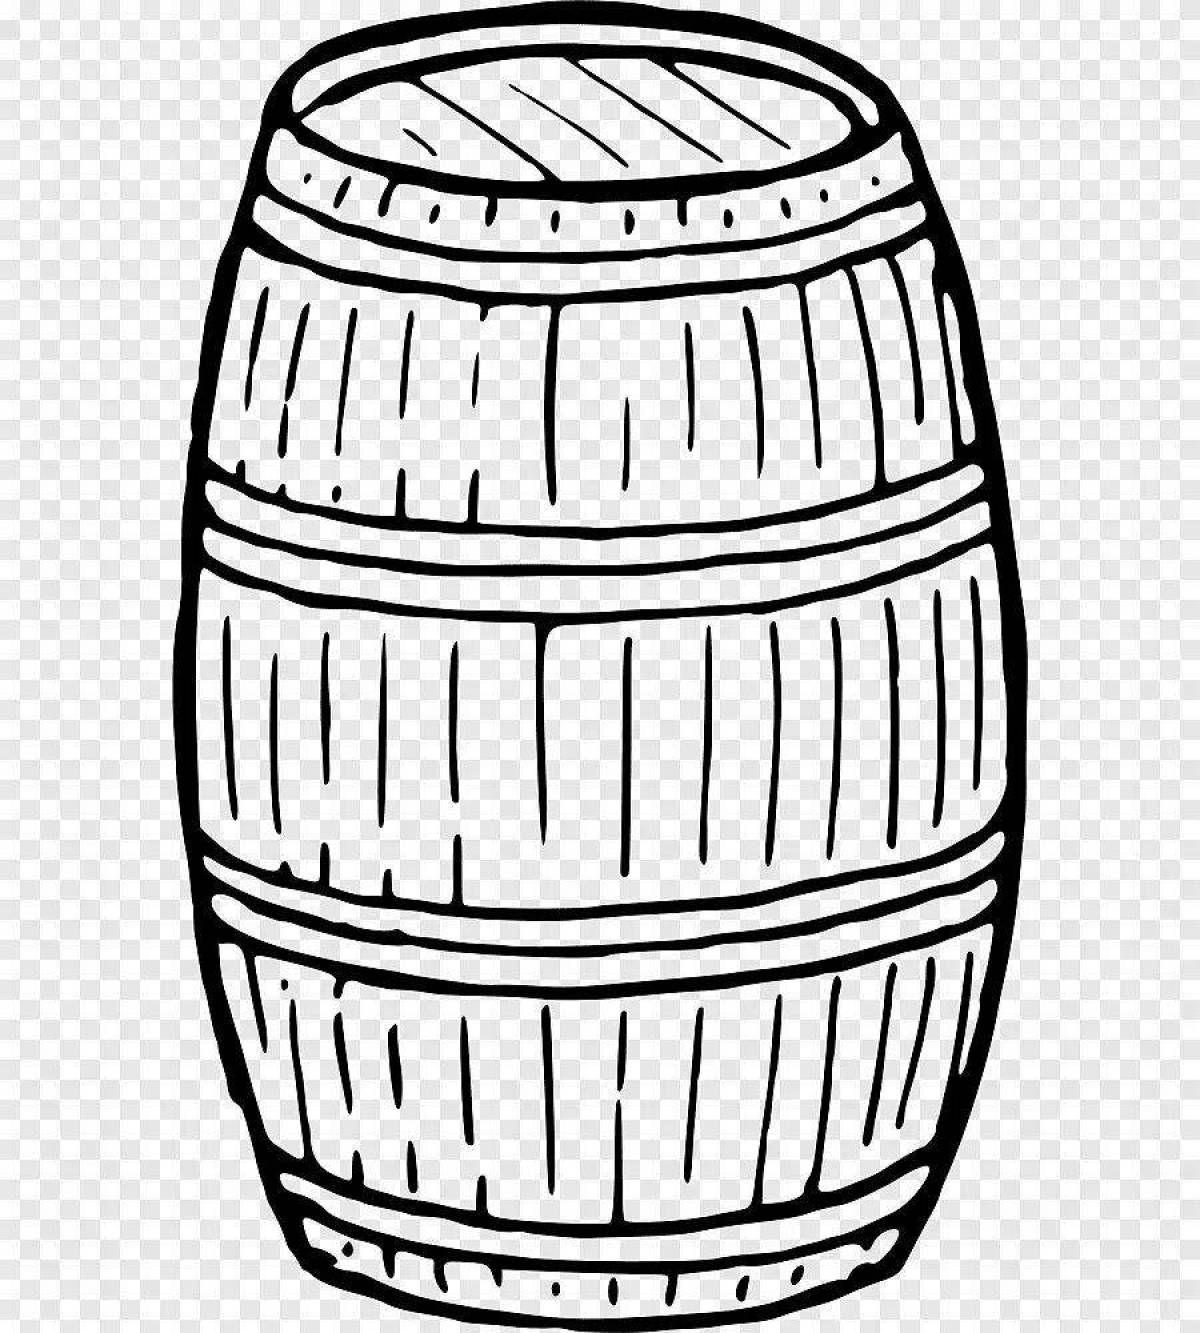 Adorable barrel coloring book for kids